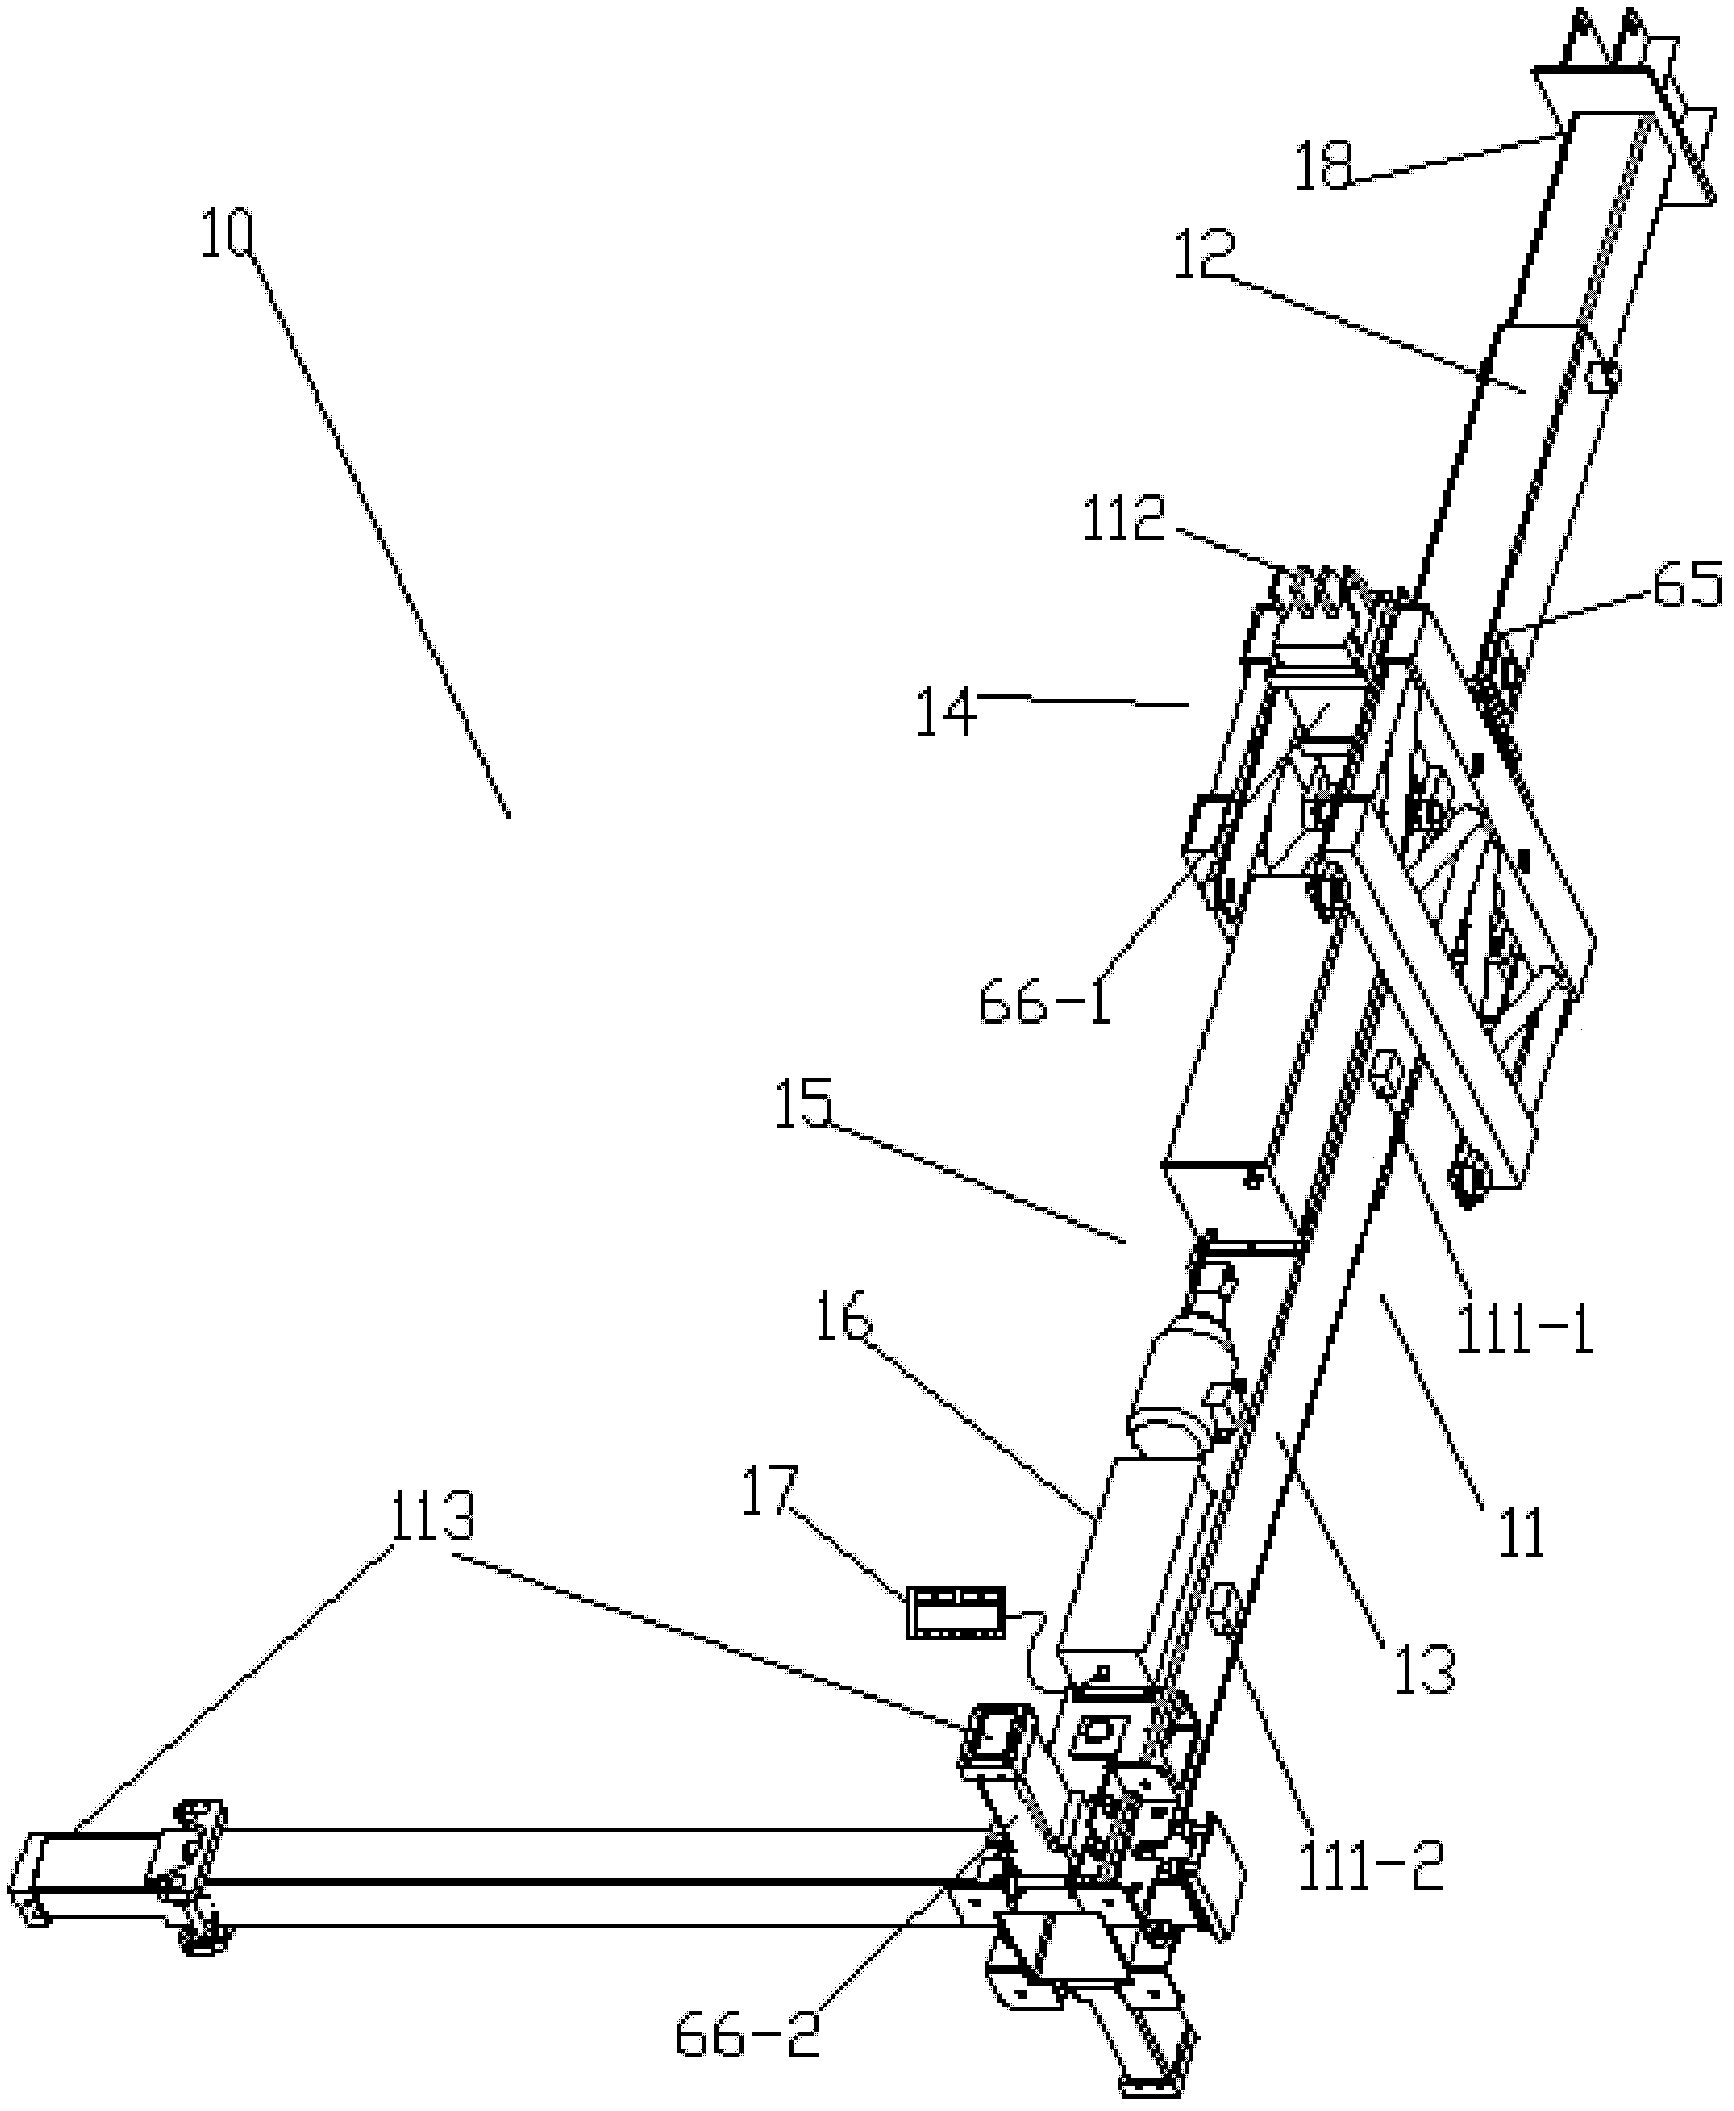 Hydraulic lifting self-ascending template system of intelligent independent unit structure